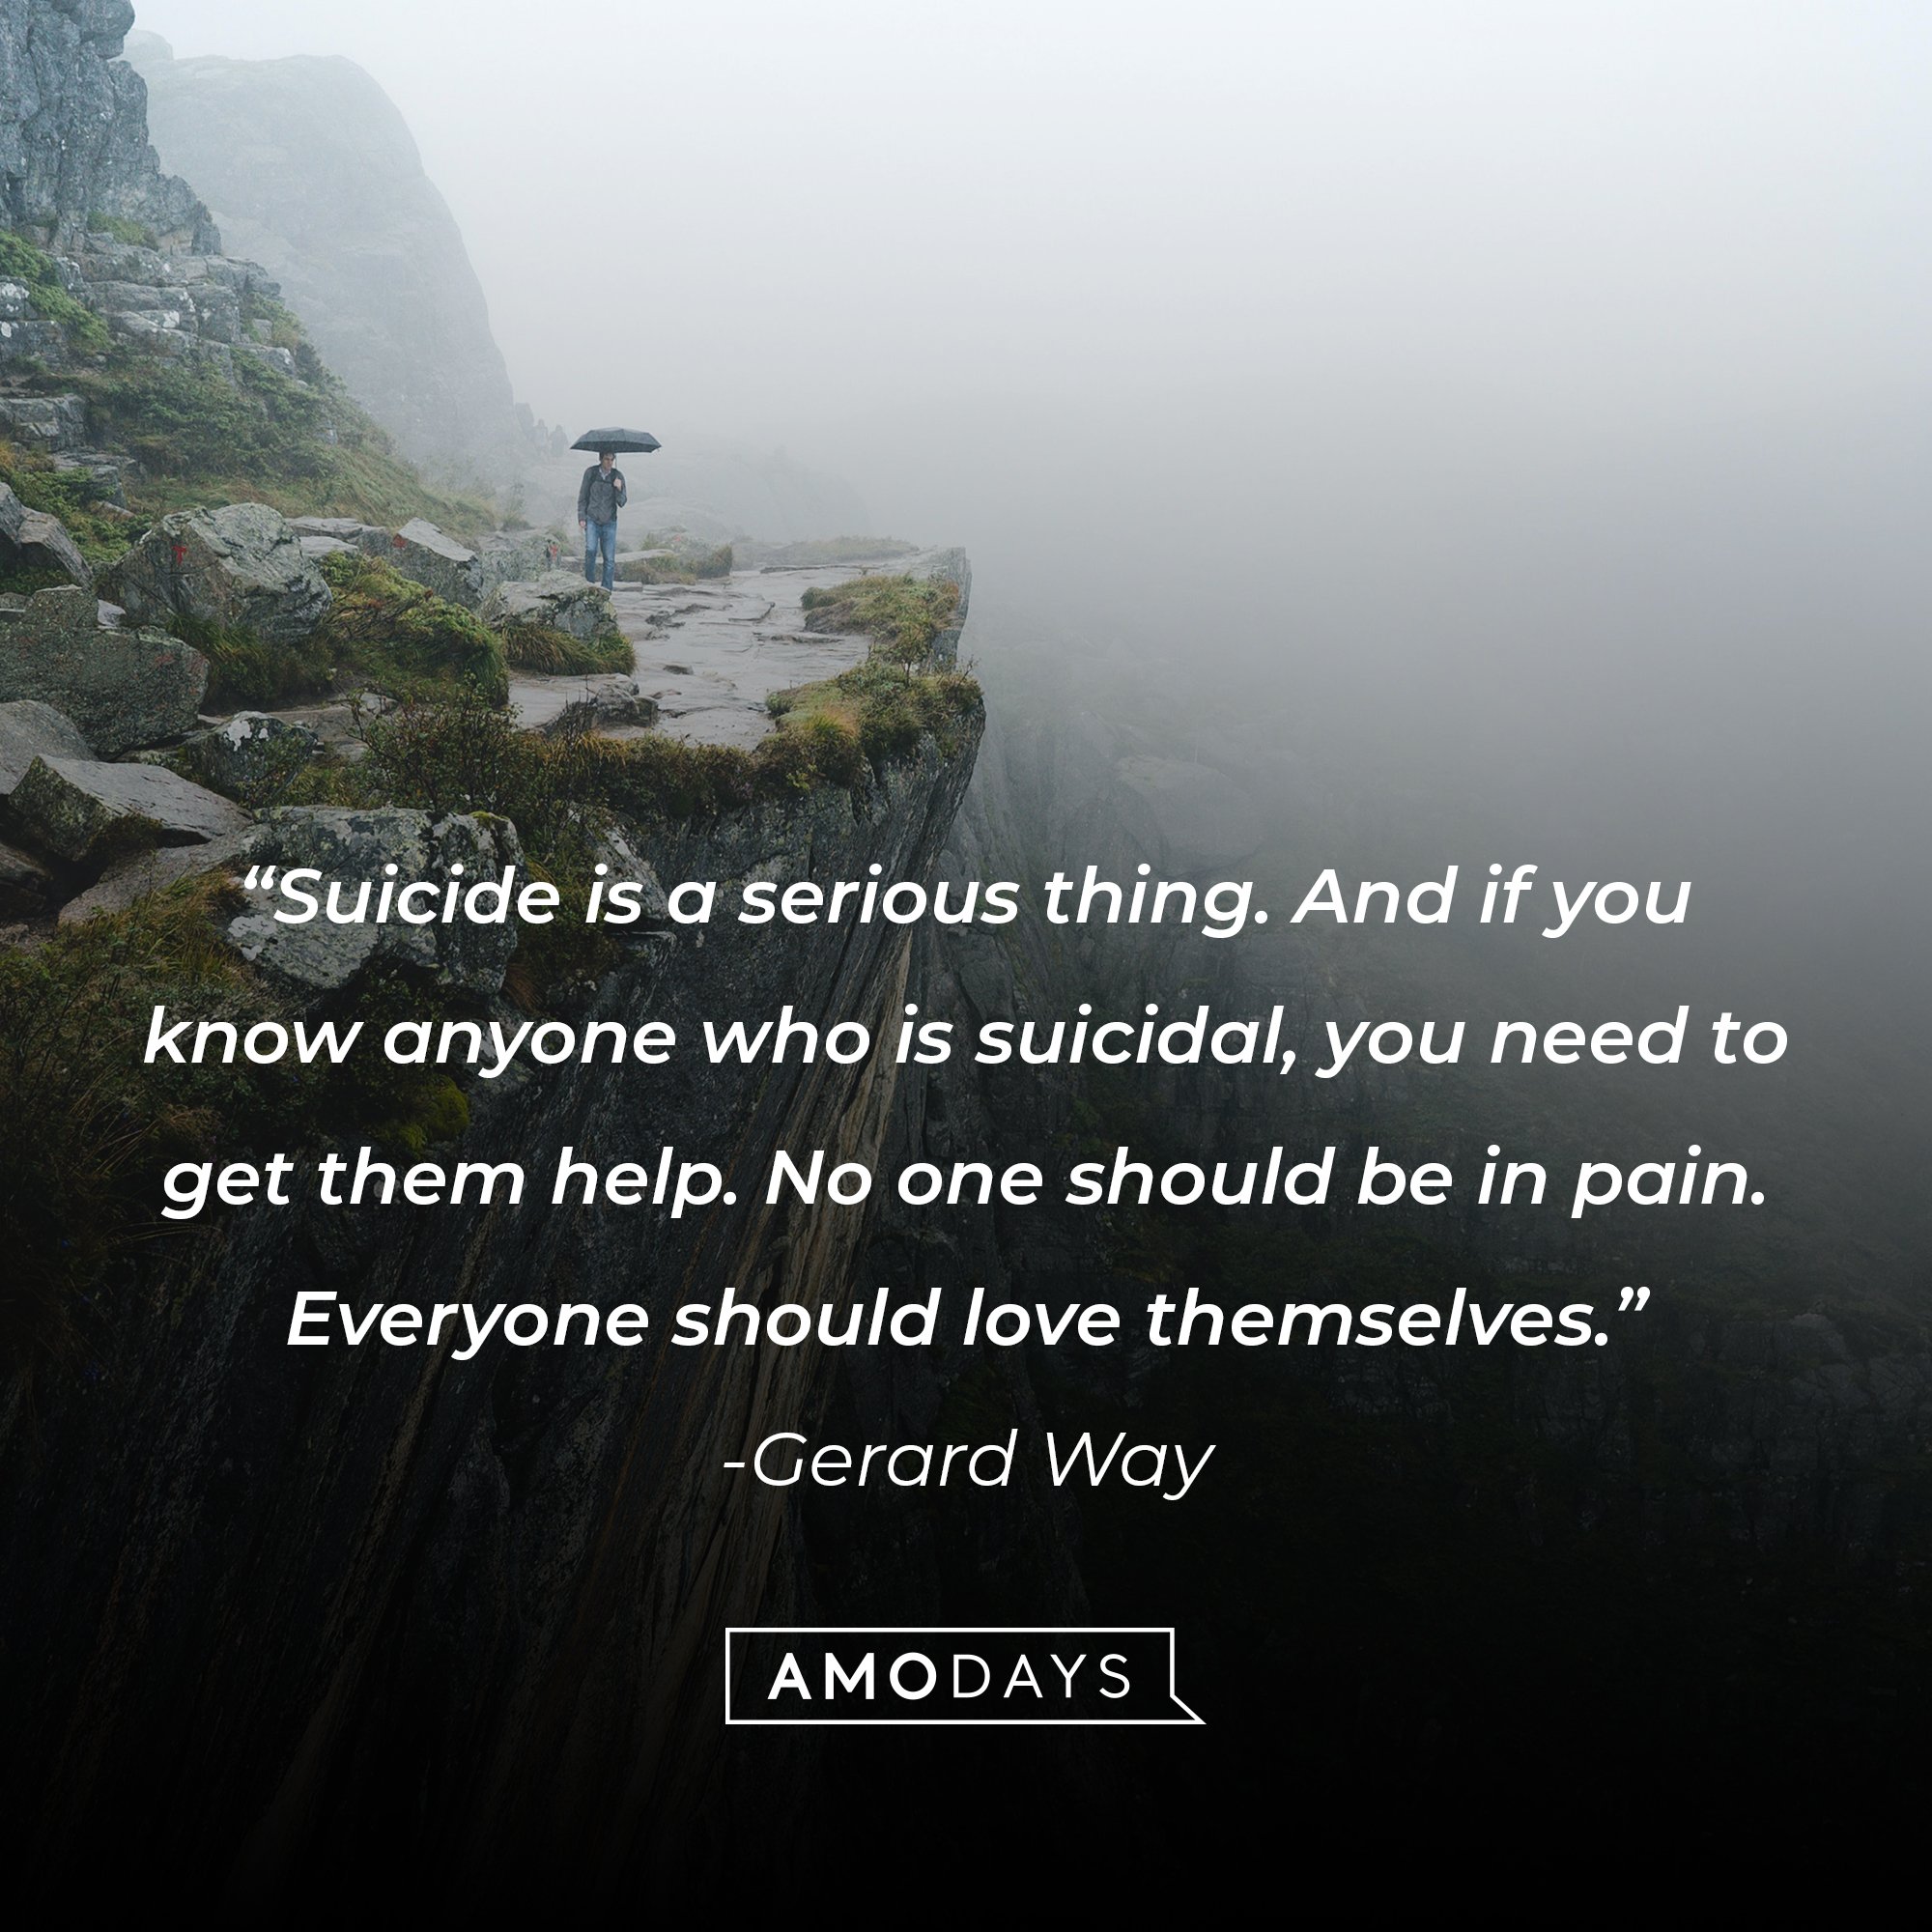 Gerard Way's quote: “Suicide is a serious thing. And if you know anyone who is suicidal, you need to get them help. No one should be in pain. Everyone should love themselves.” | Image: AmoDays